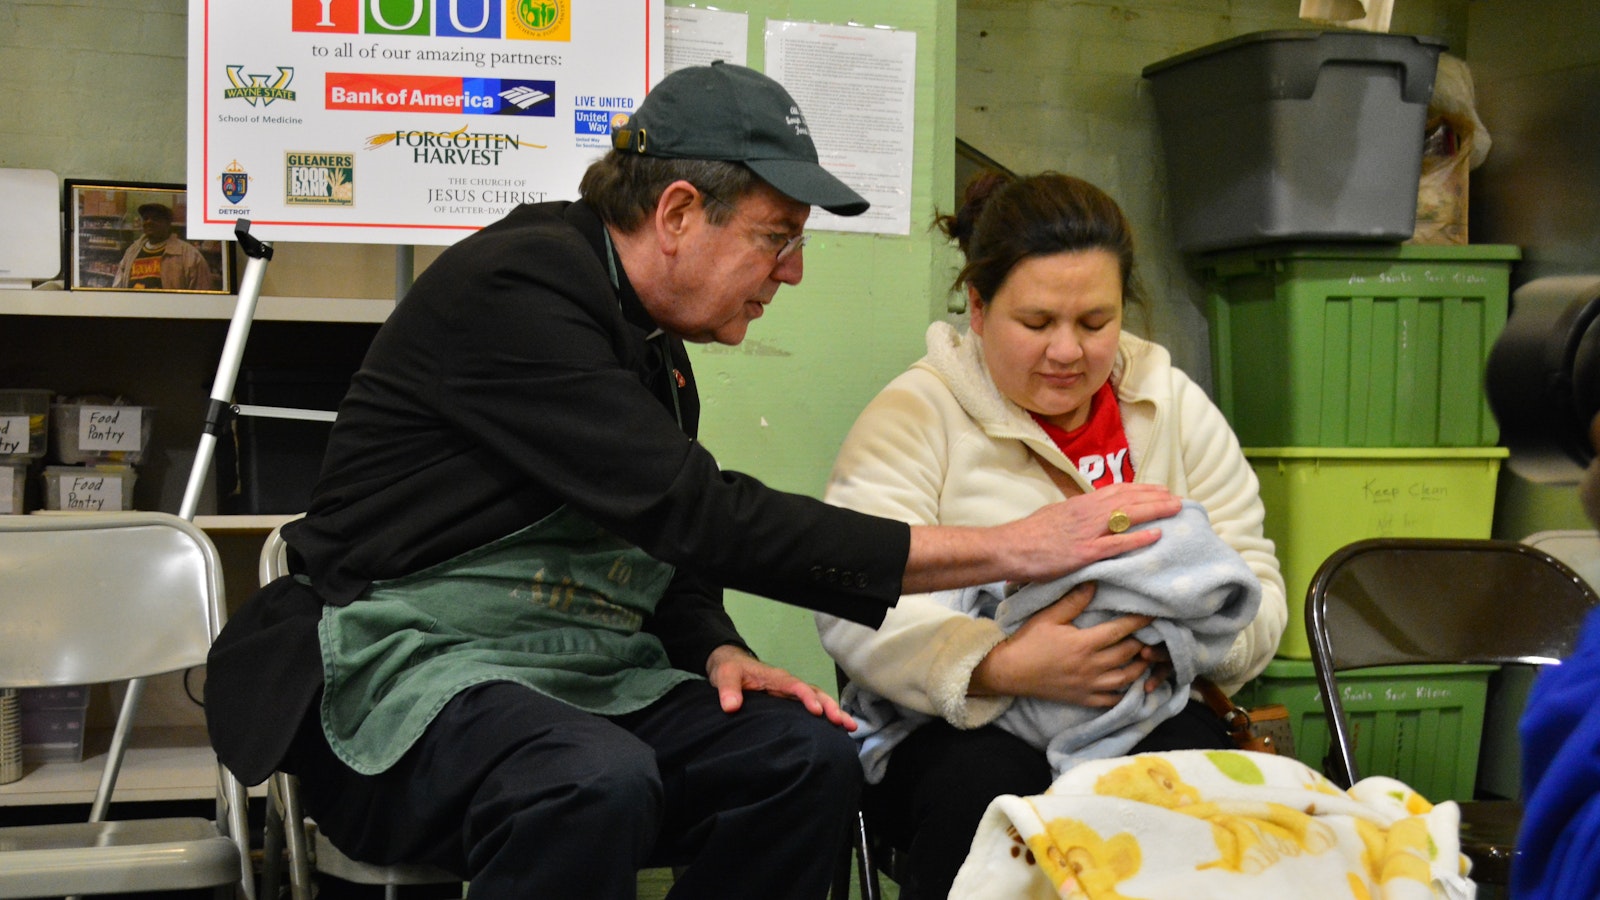 Archbishop Vigneron blesses a newborn infant and his mother while volunteering at All Saints Soup Kitchen and Food Pantry in southwest Detroit during Lent on Feb. 13, 2018. (Michael Stechschulte | Detroit Catholic file photo)